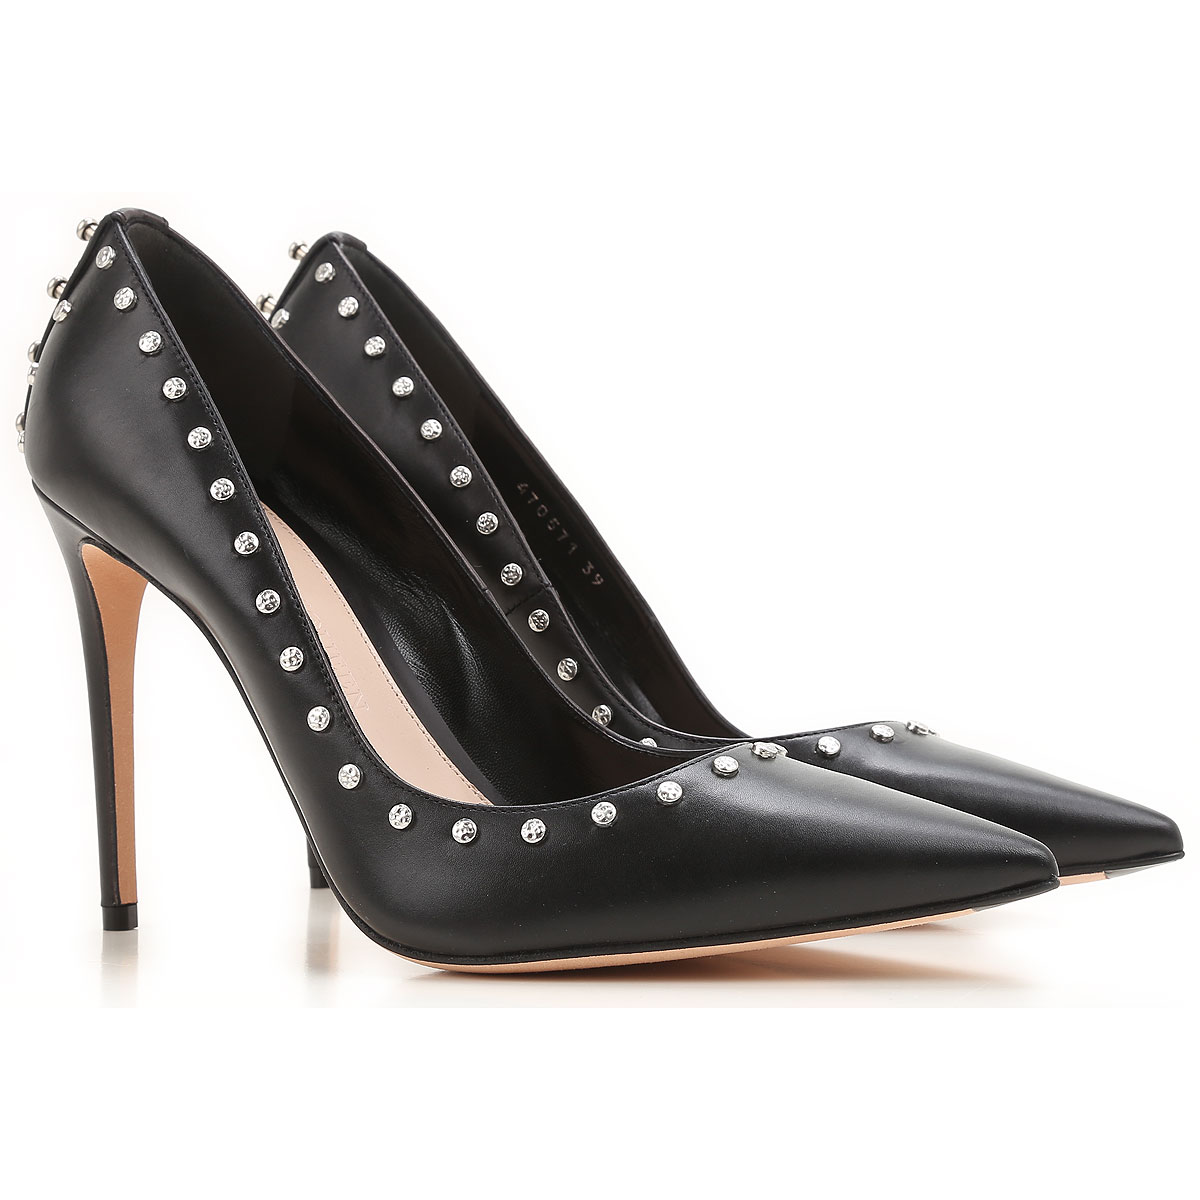 Womens Shoes Alexander McQueen, Style code: 470571-whmu0-1000